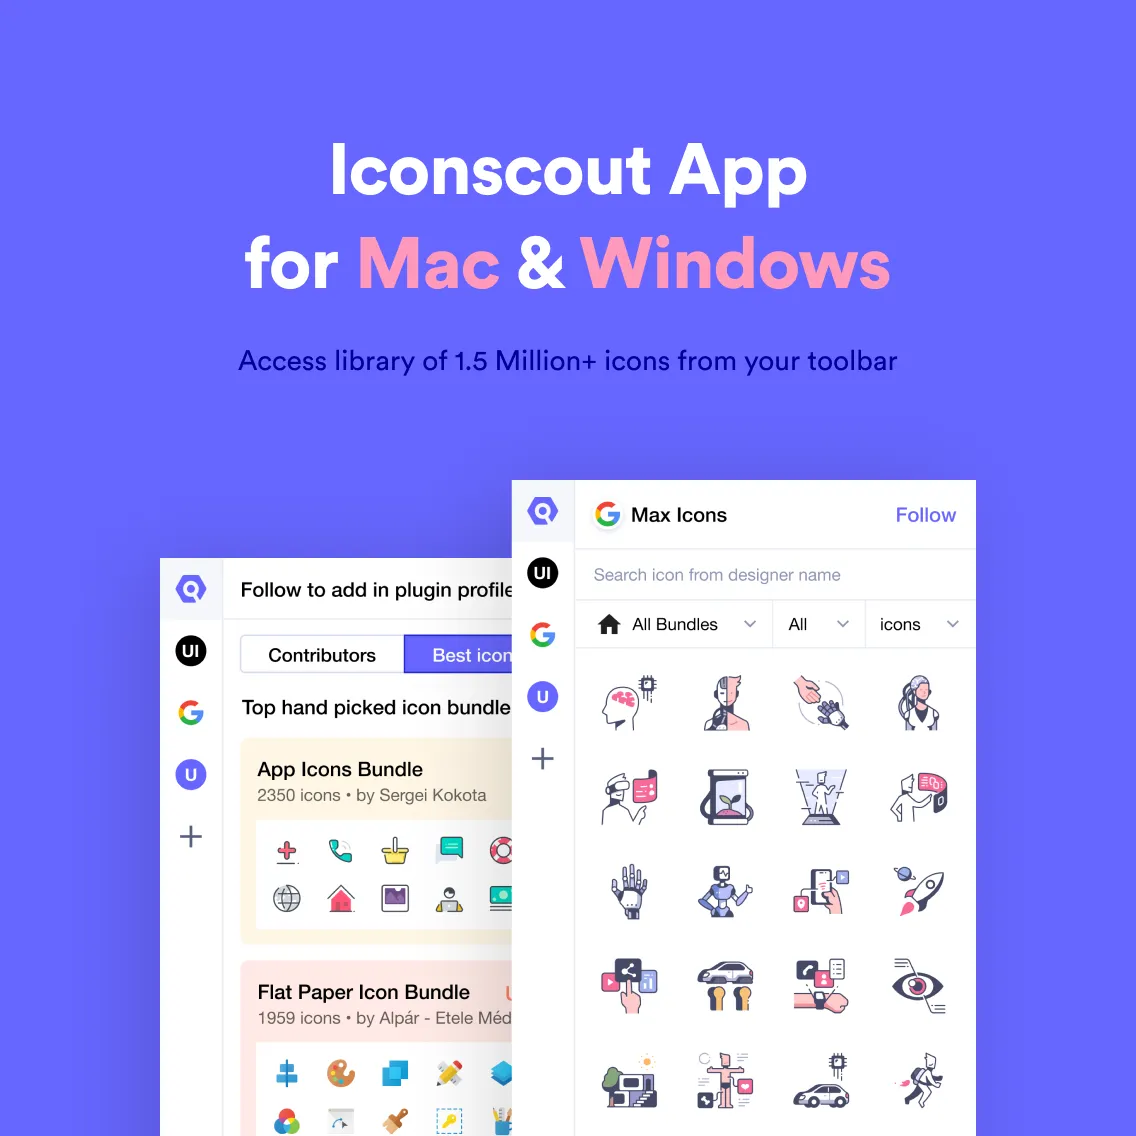 Iconscout App for Mac & Windows